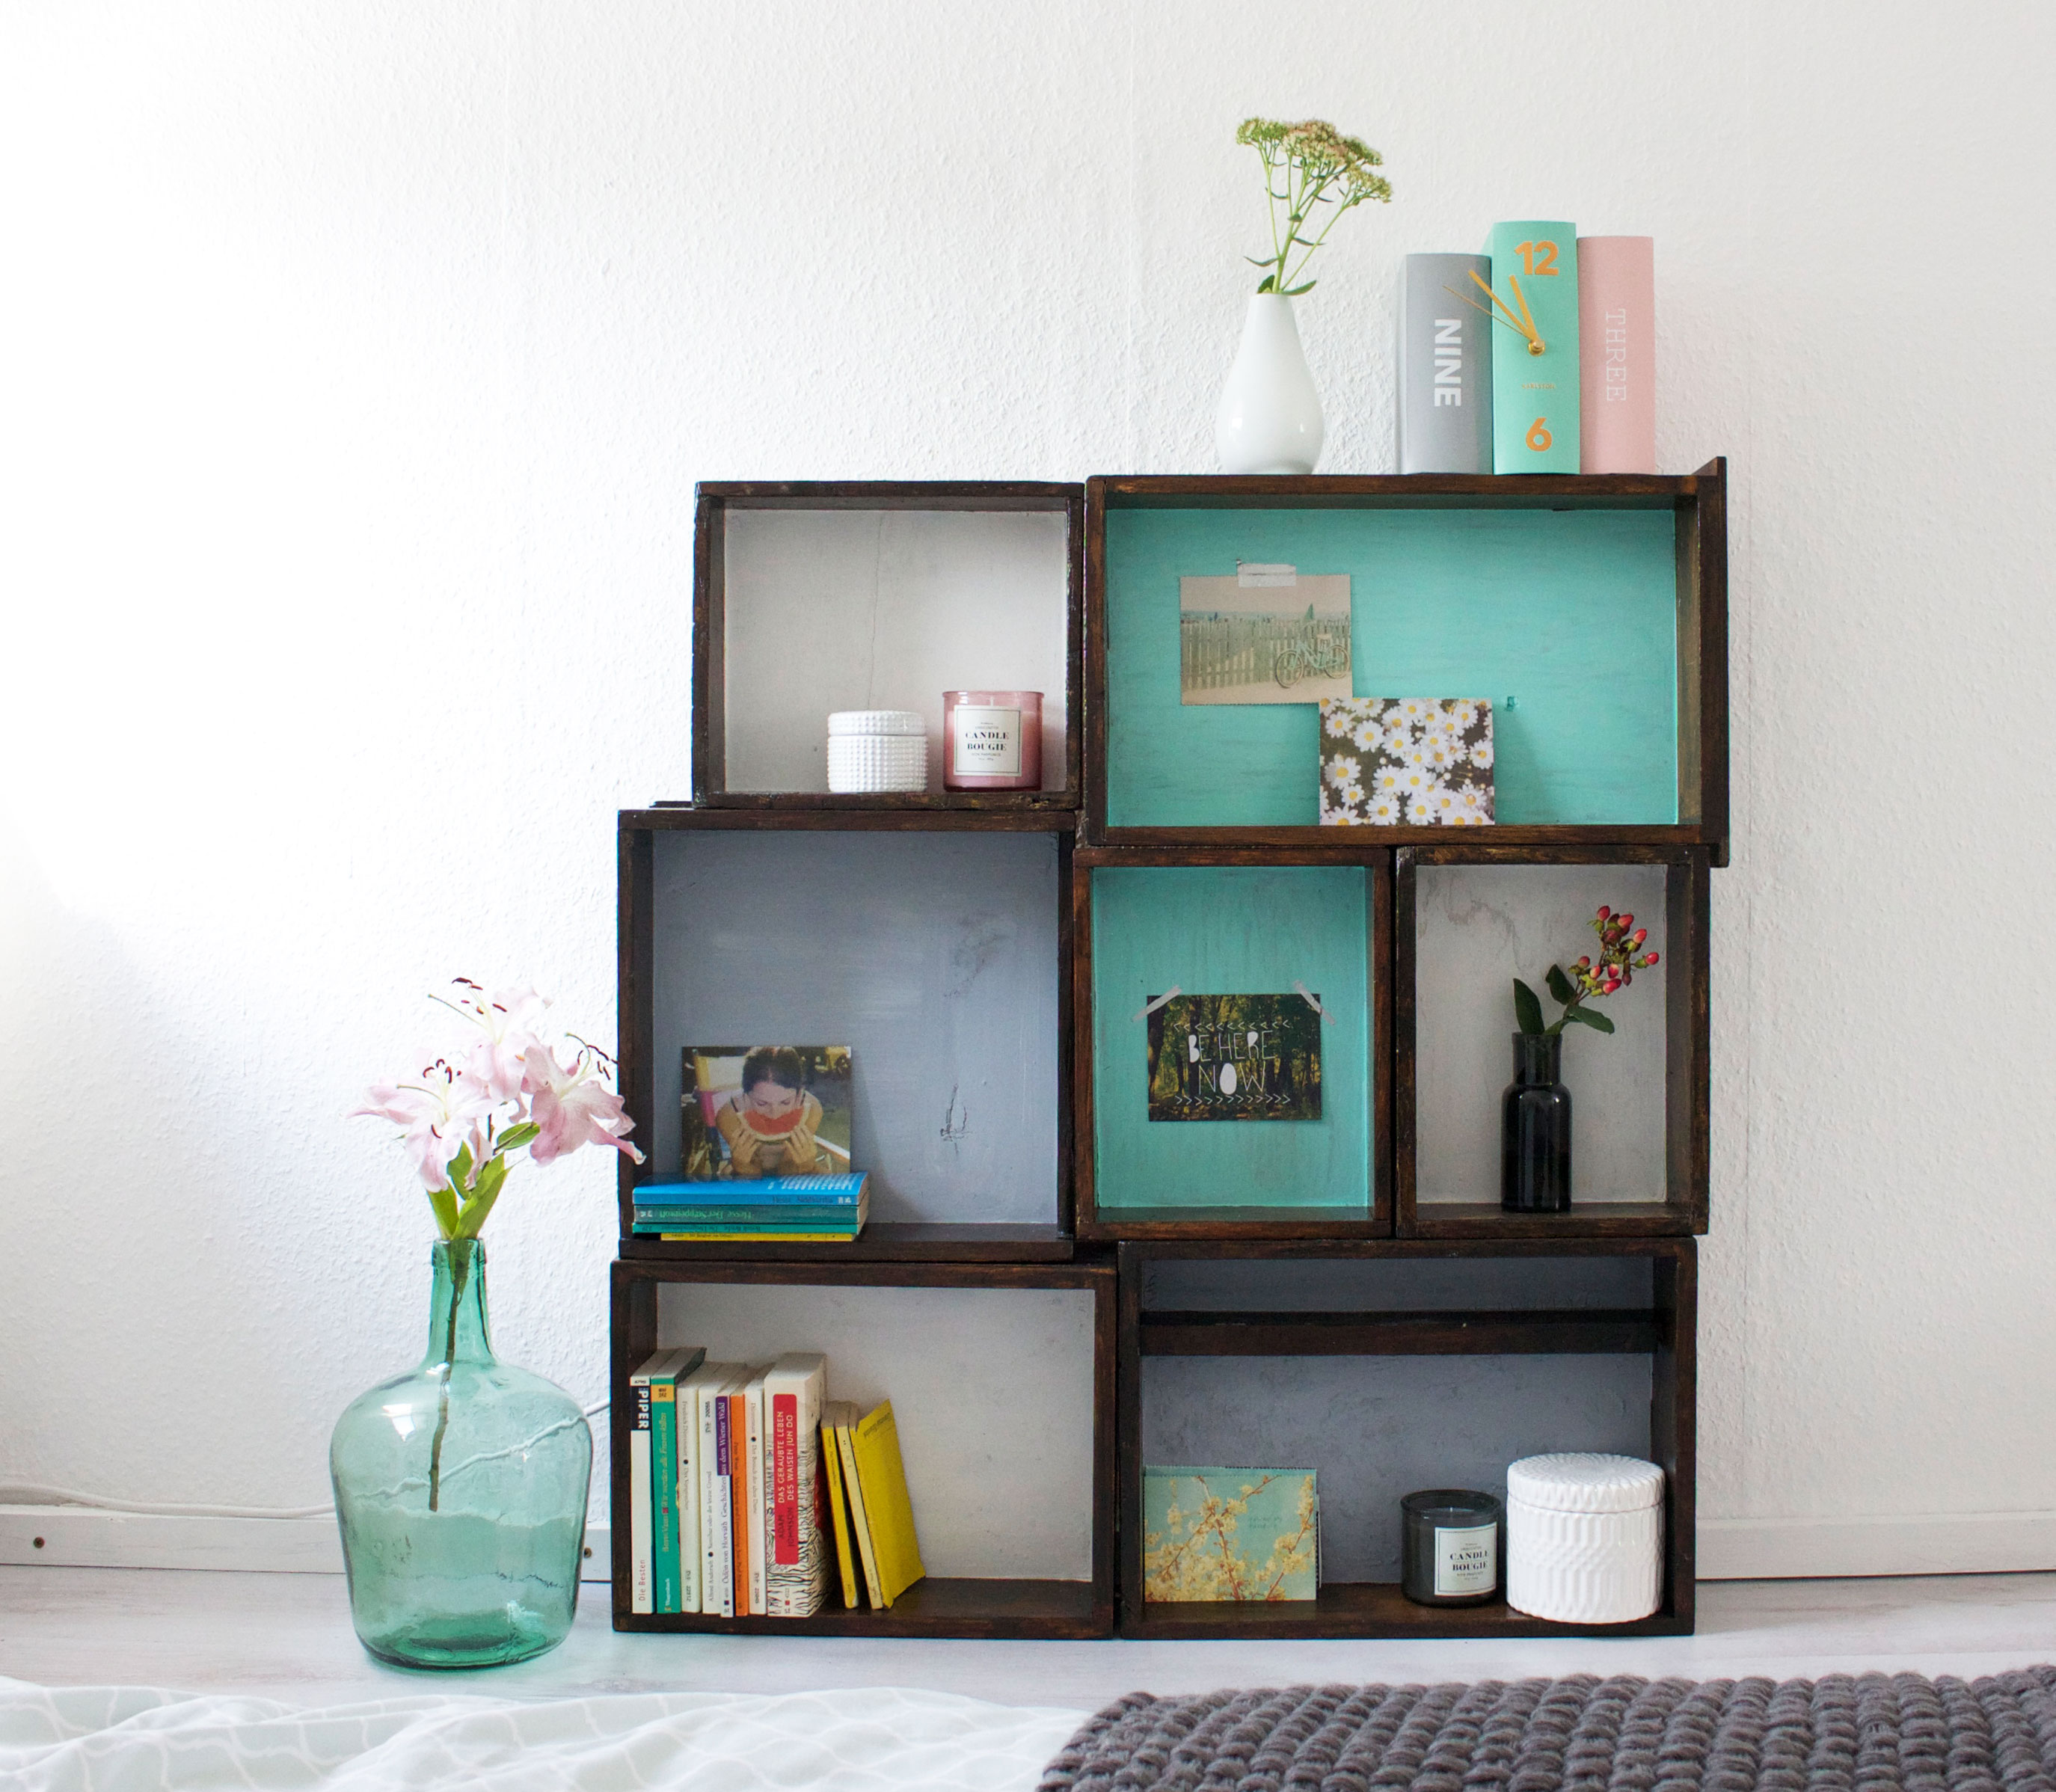 DIY wooden box shelving unit composed of several boxes